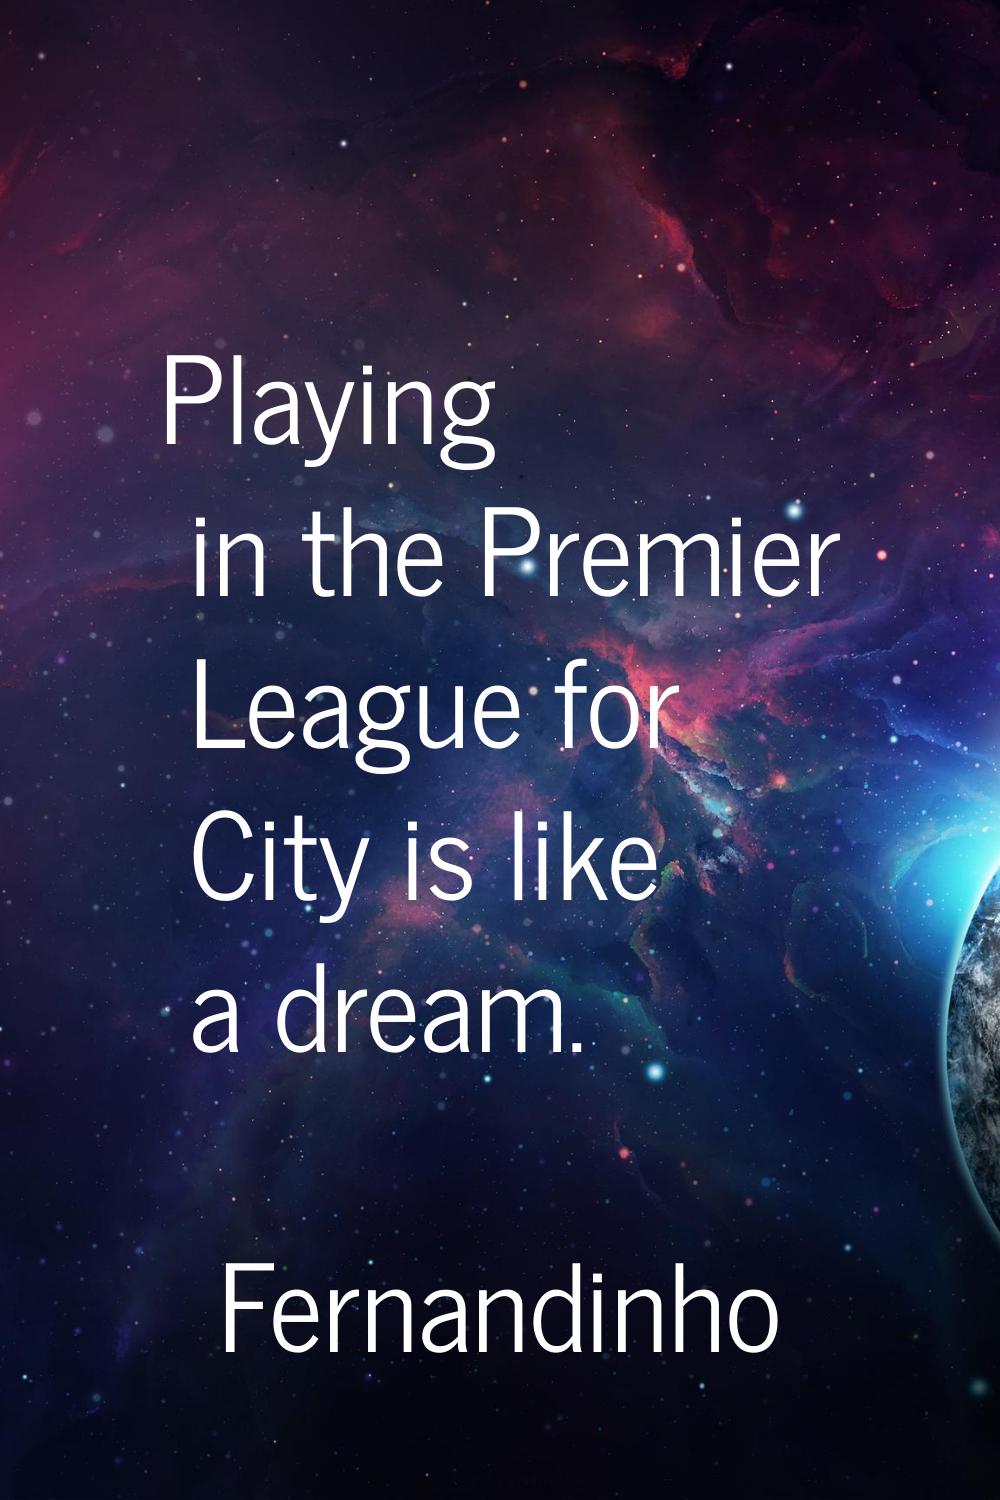 Playing in the Premier League for City is like a dream.